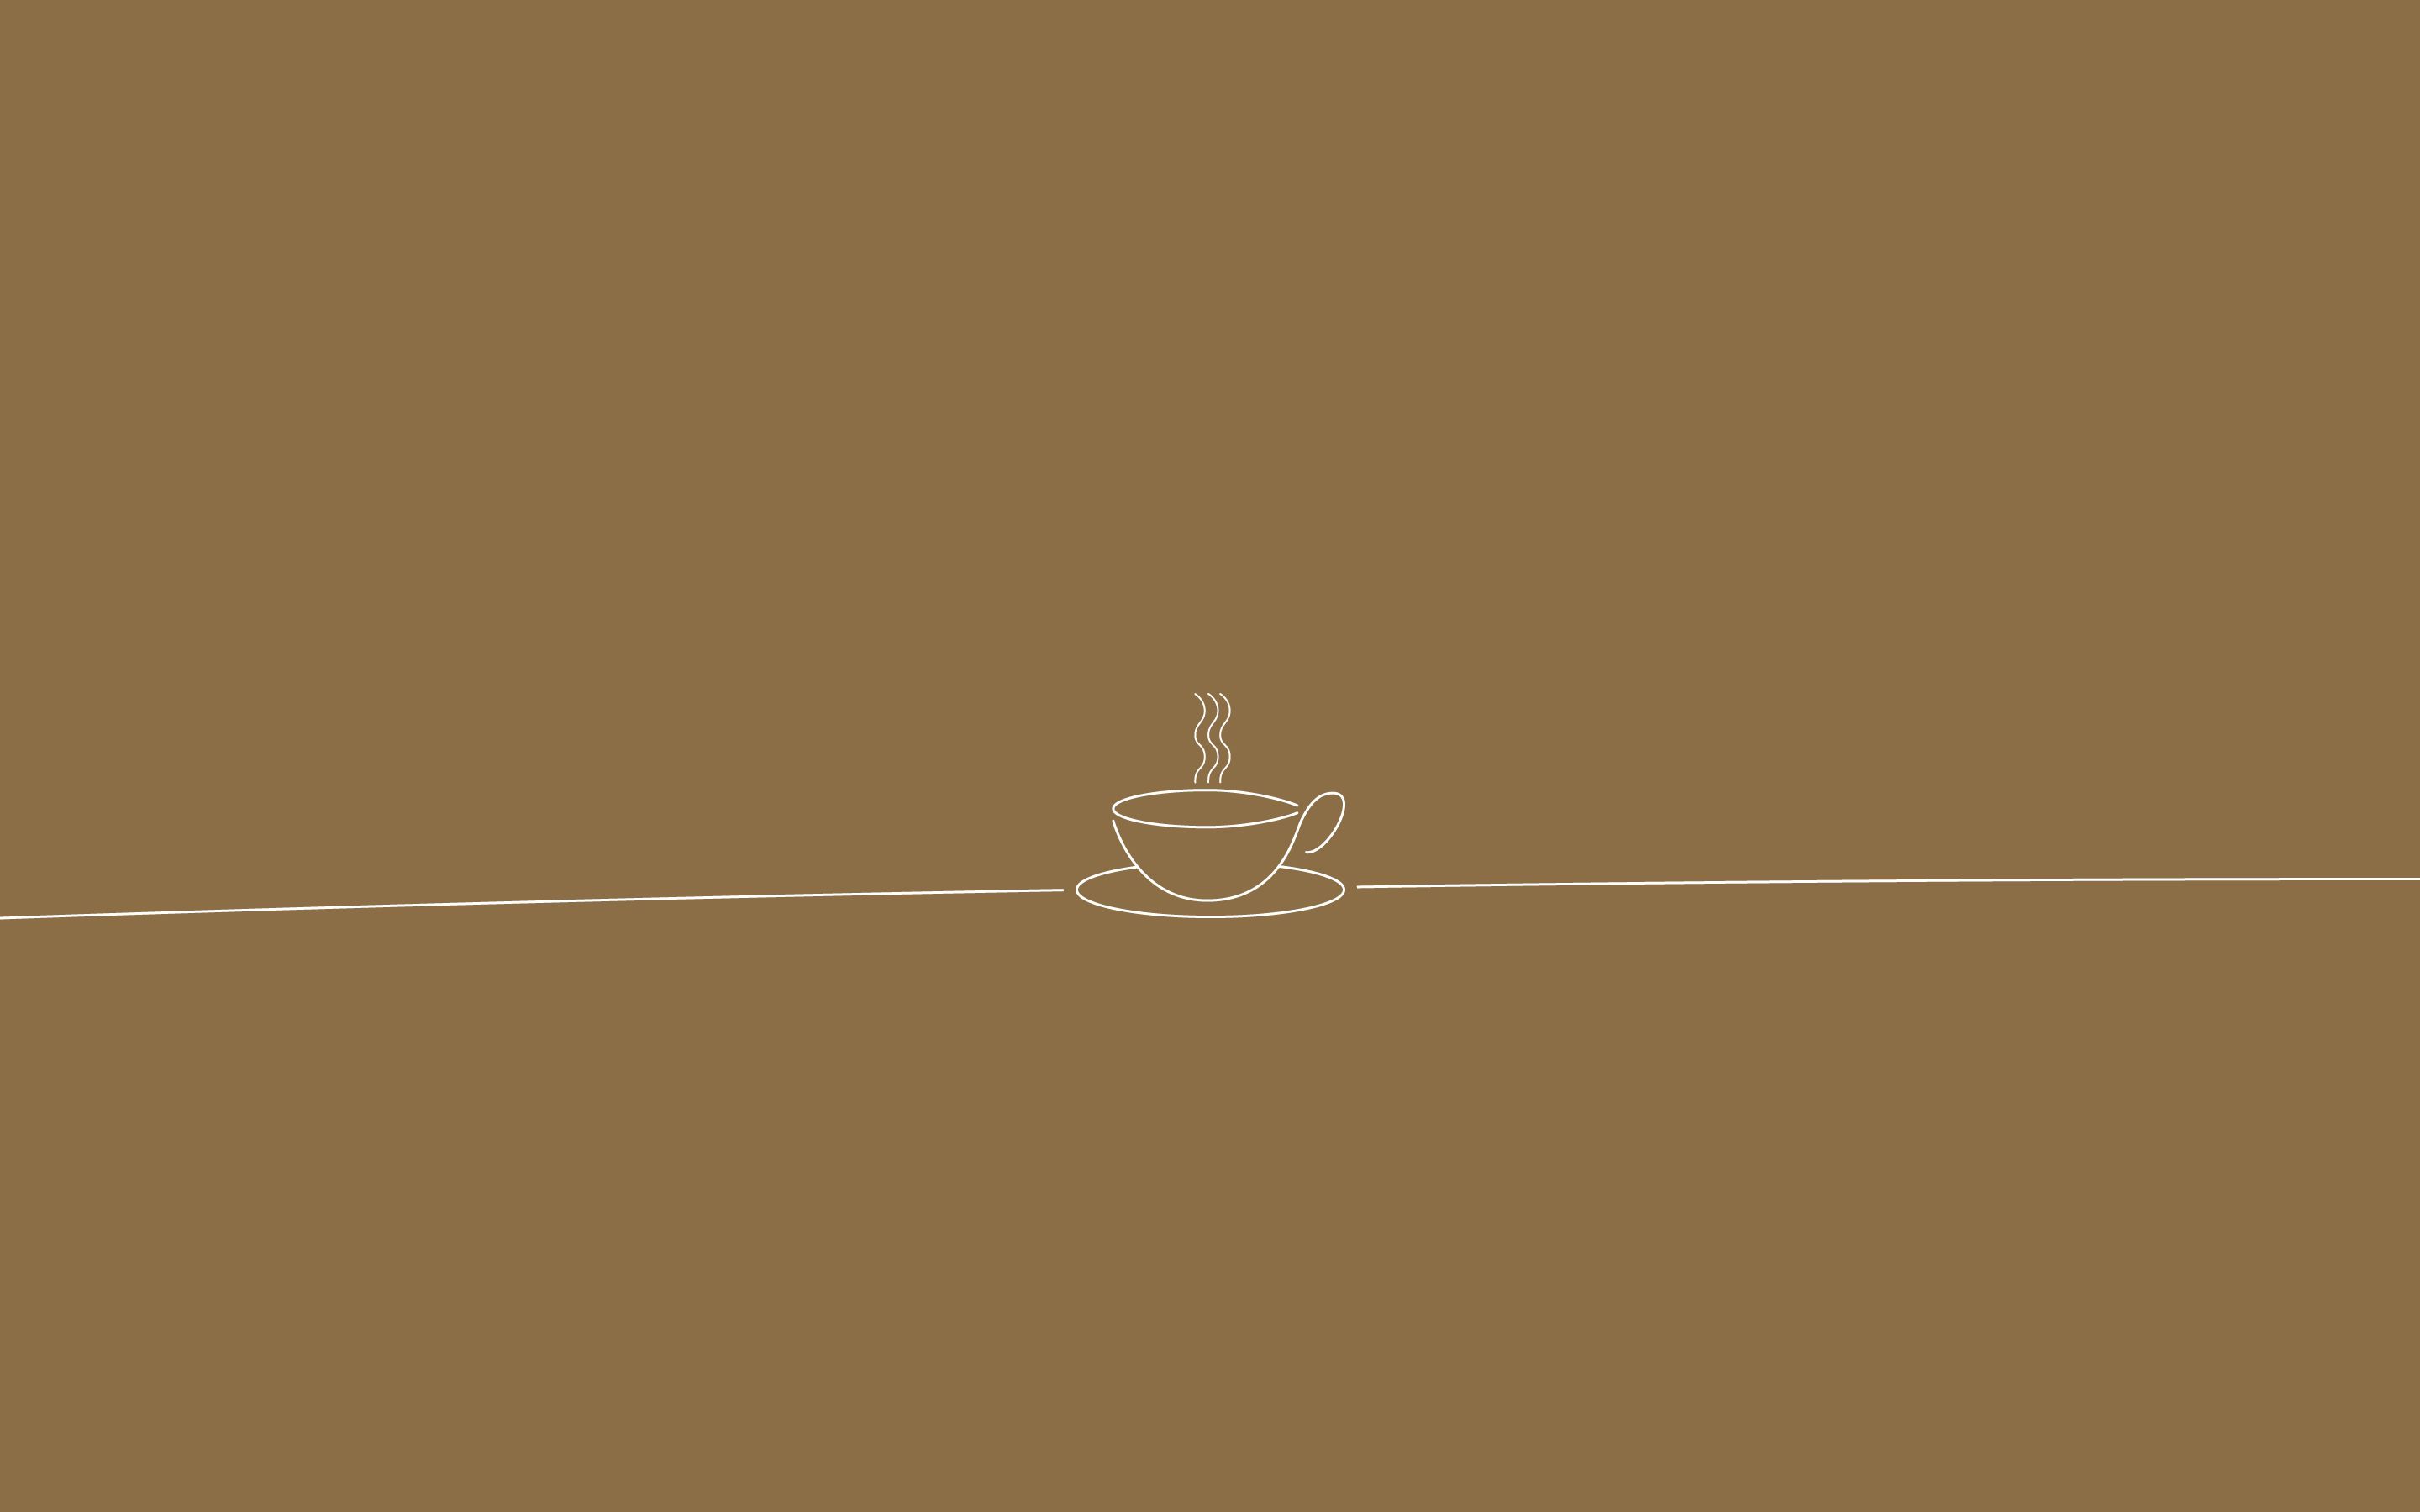 A coffee cup on the table - Coffee, minimalist